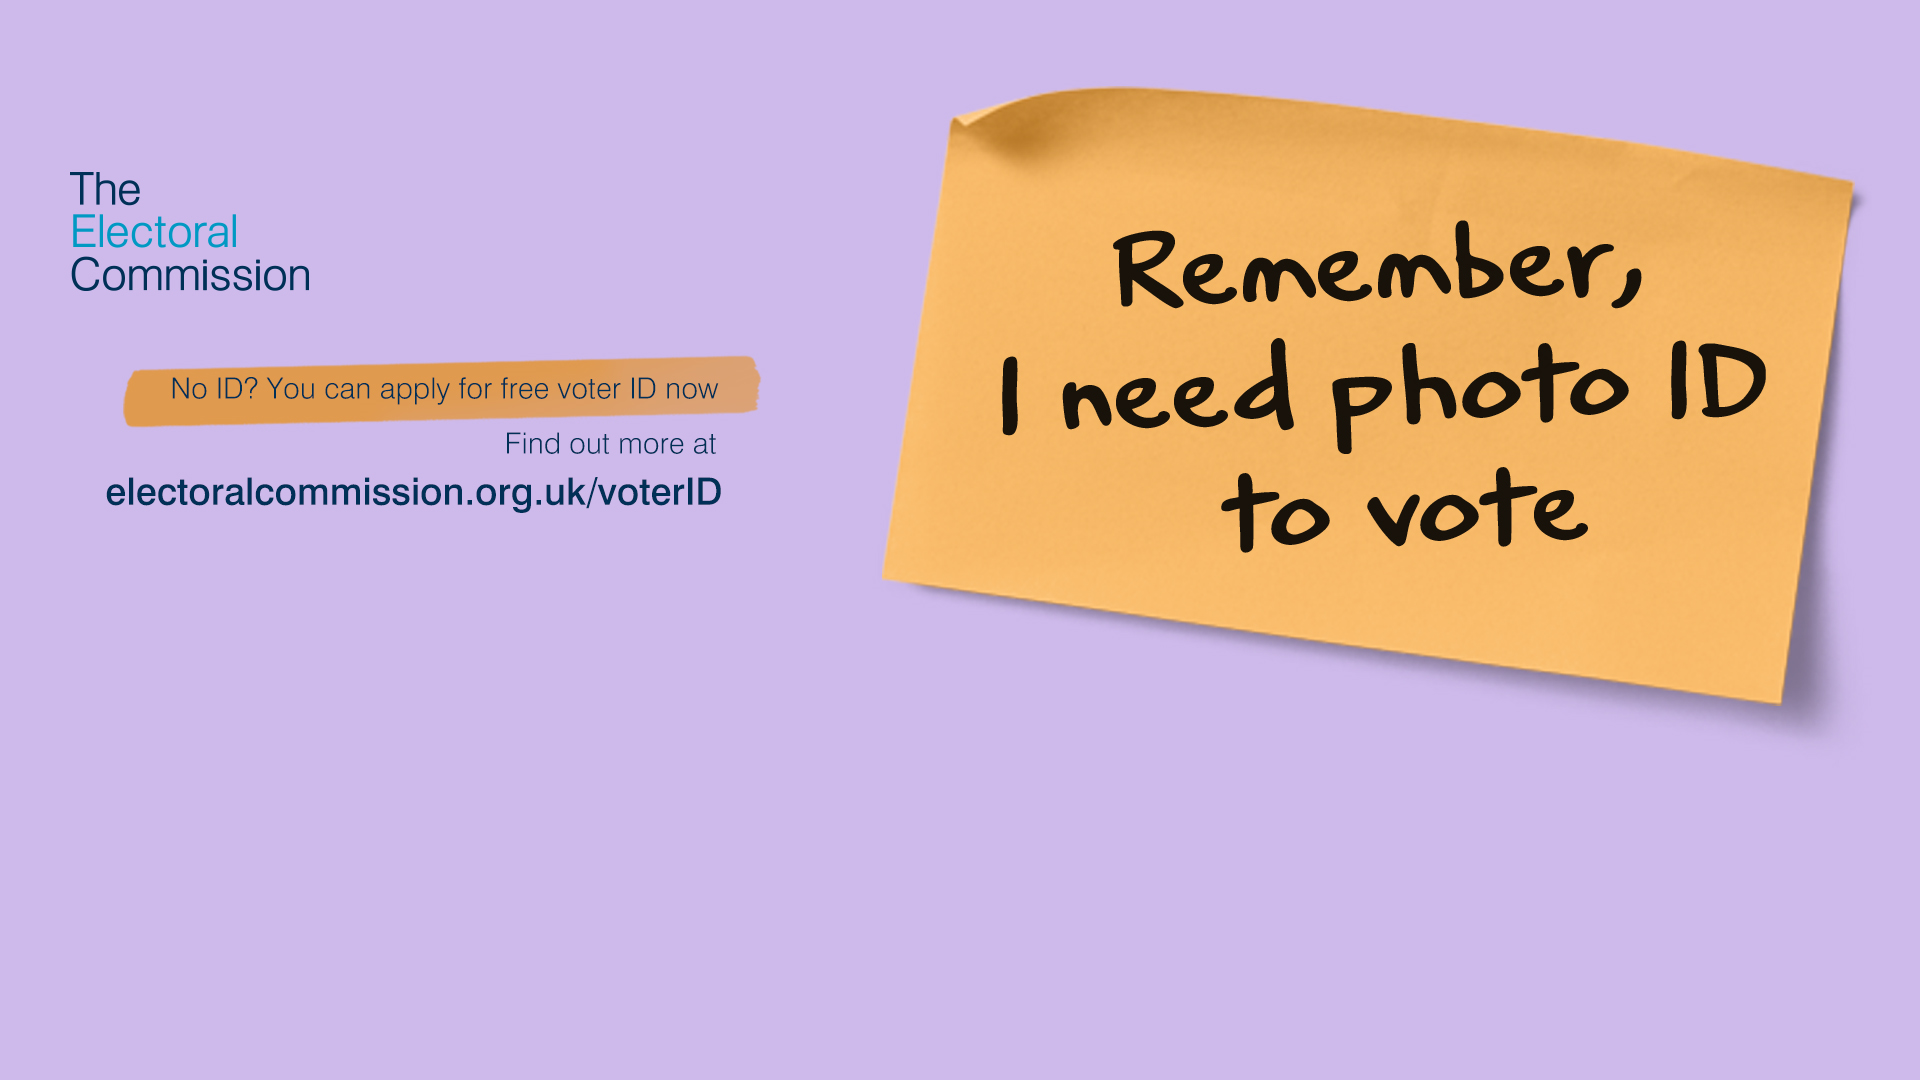 The image shows a post-it with the words: Remember, I need photo ID to vote.